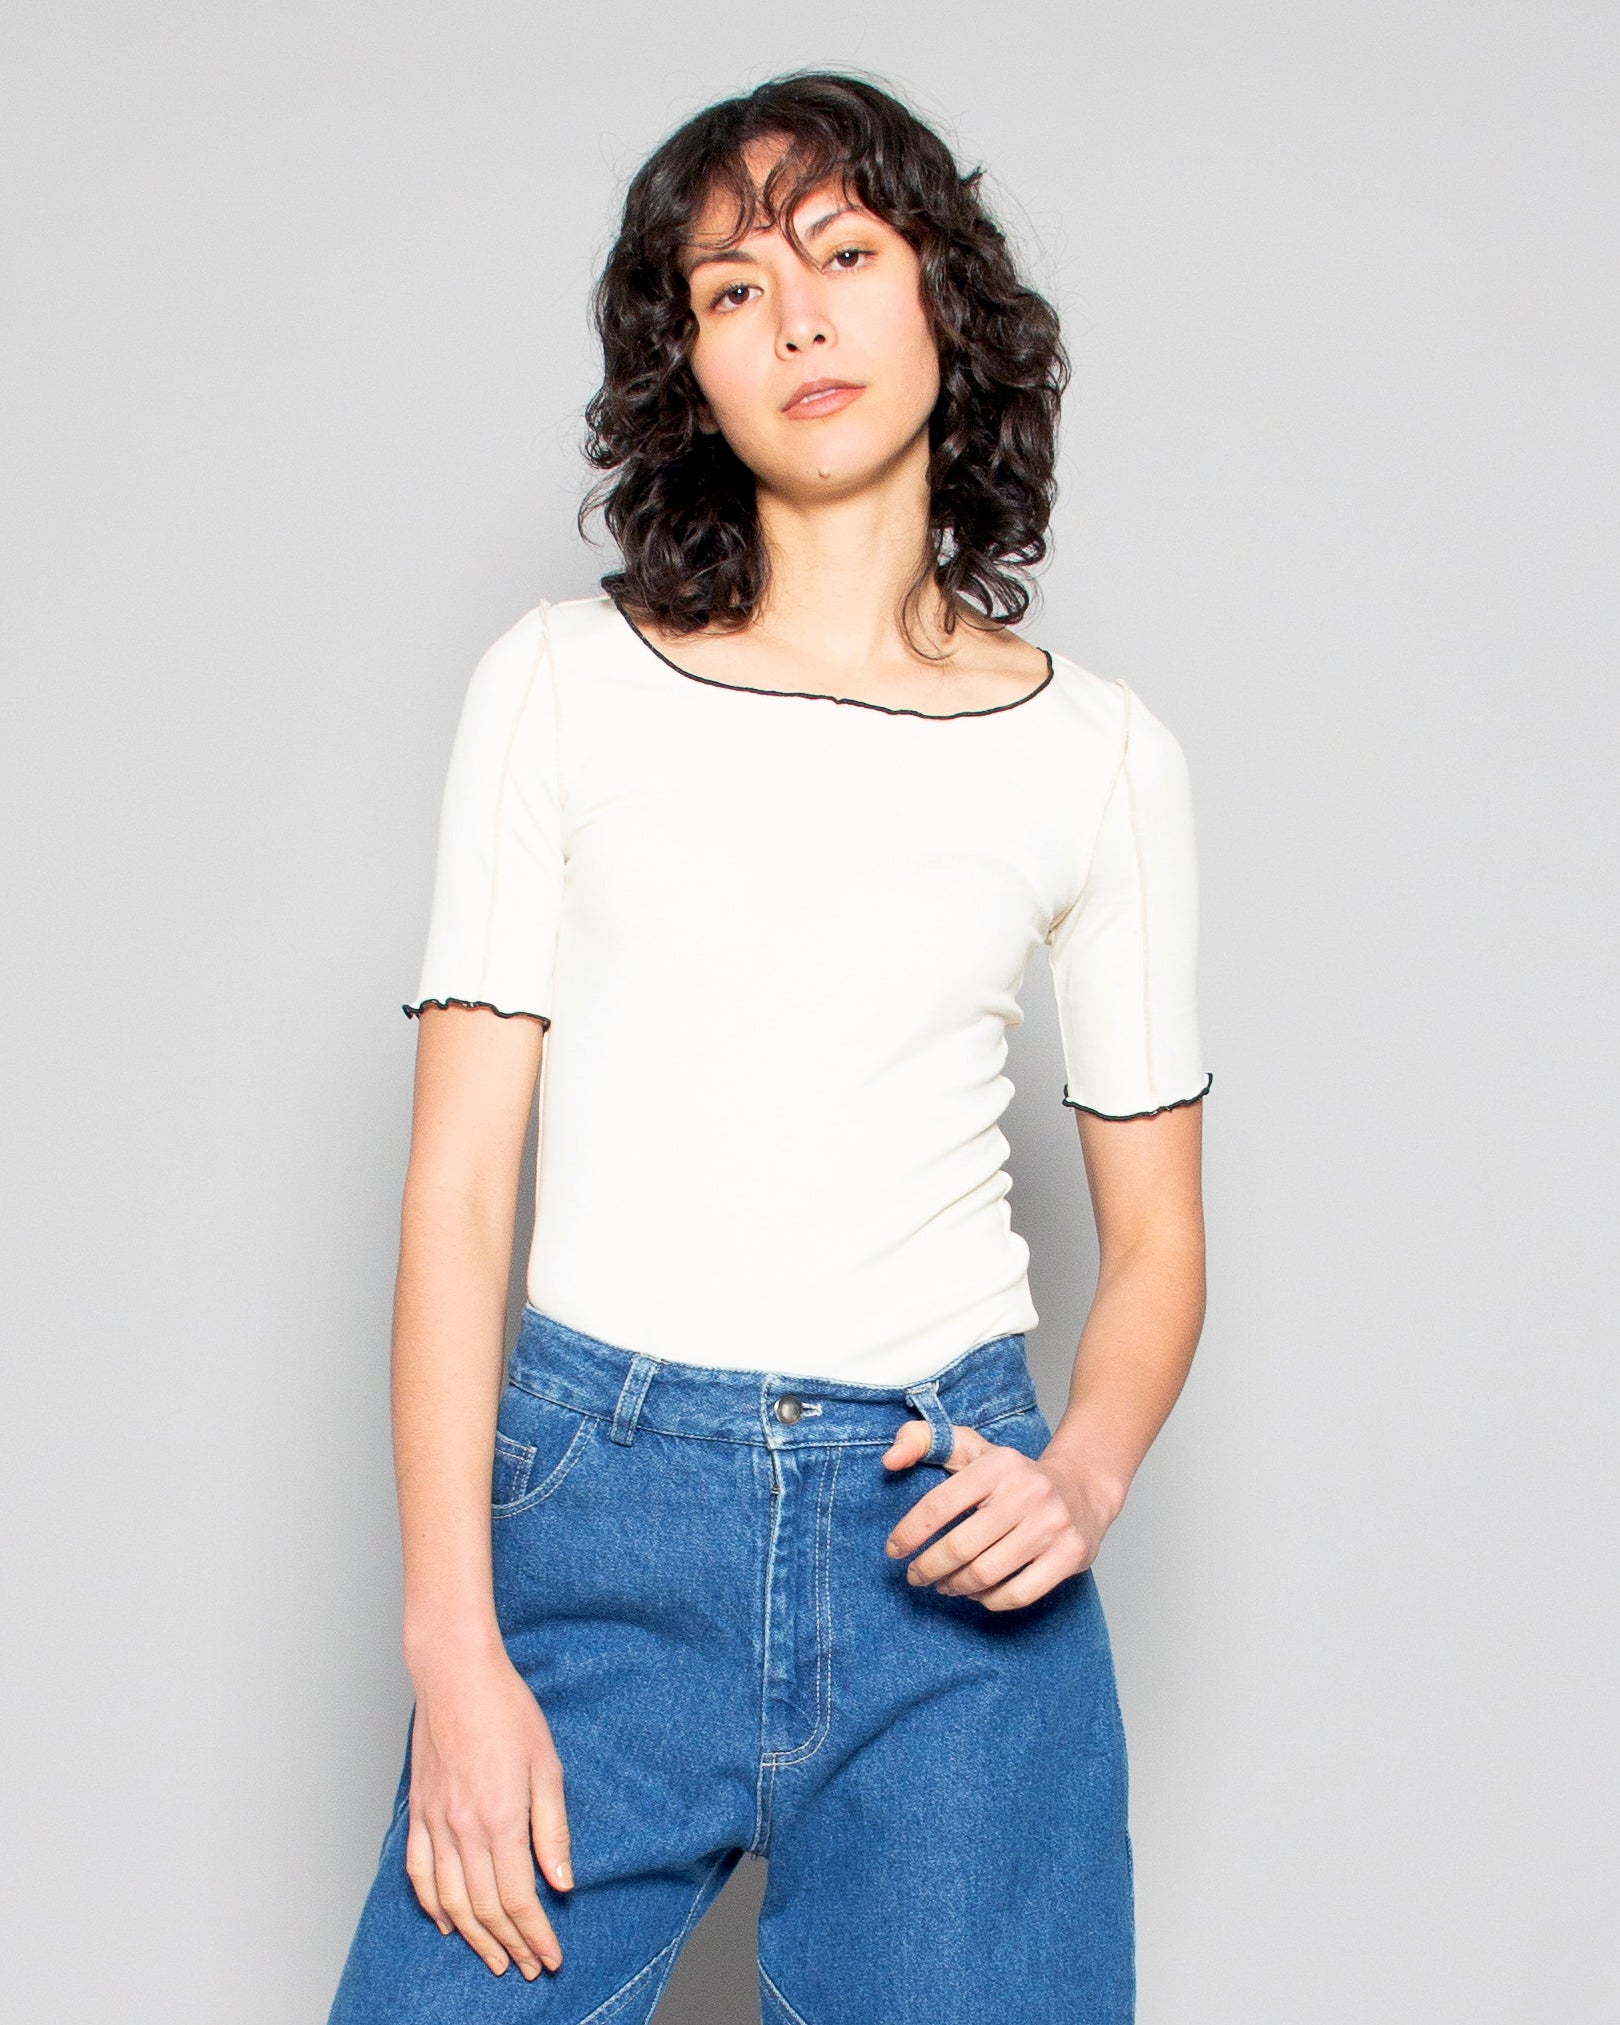 PERSONS Hayes Contrast Rib Tee in Cream available at Lahn.shop